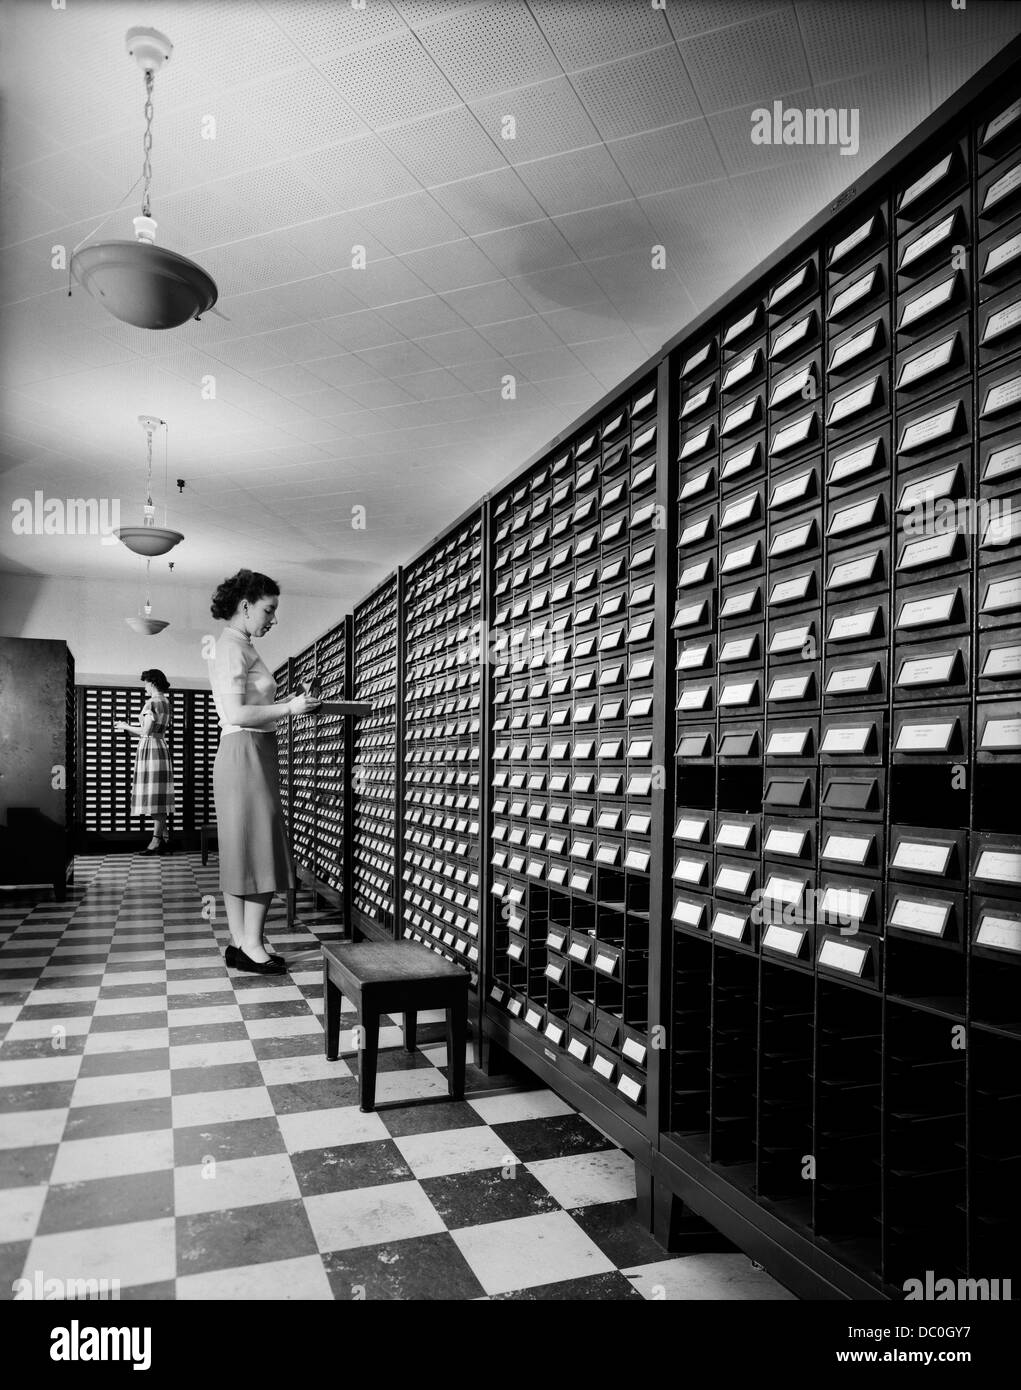 1950s 1960s TWO YOUNG WOMEN STANDING BESIDE OPEN DRAWERS OF COMPUTER PUNCH CARD FILING CABINETS Stock Photo